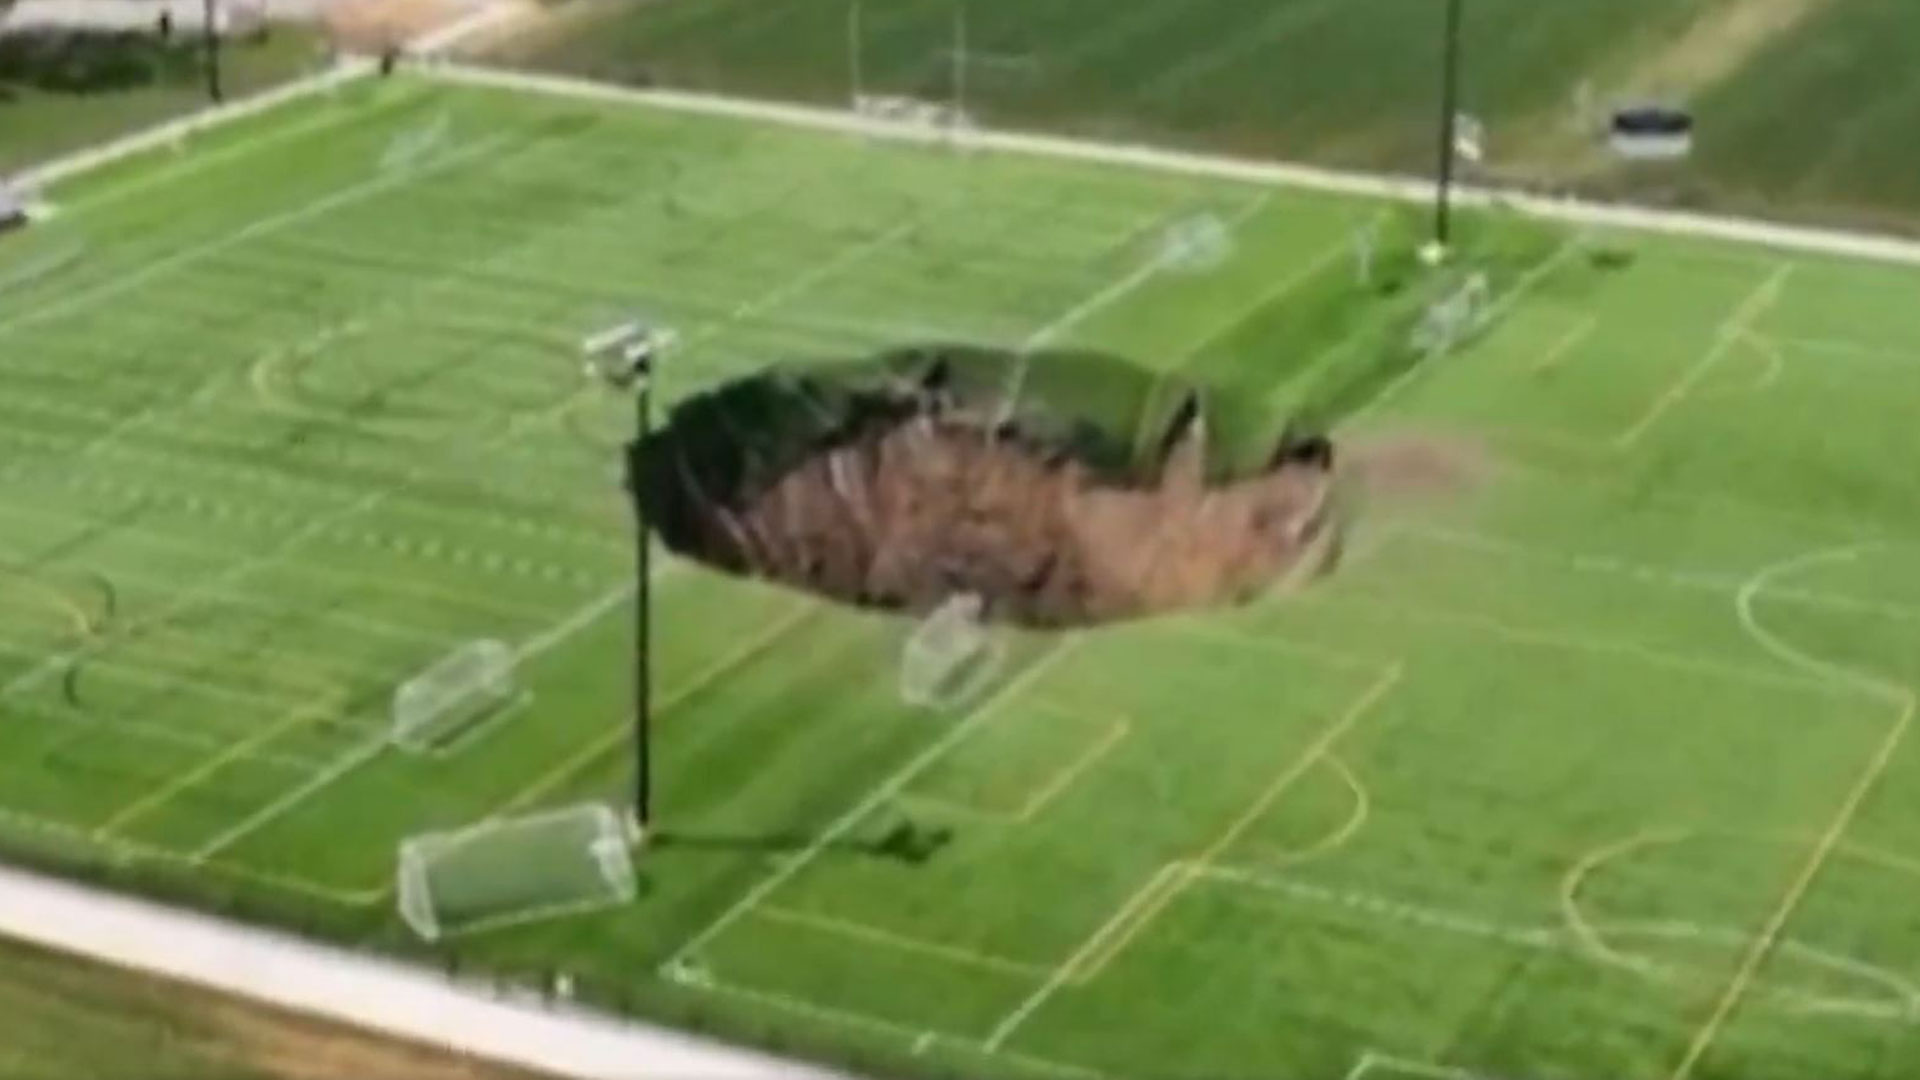 Watch horror moment soccer pitch collapses as 100-foot sinkhole swallows middle of field [Video]